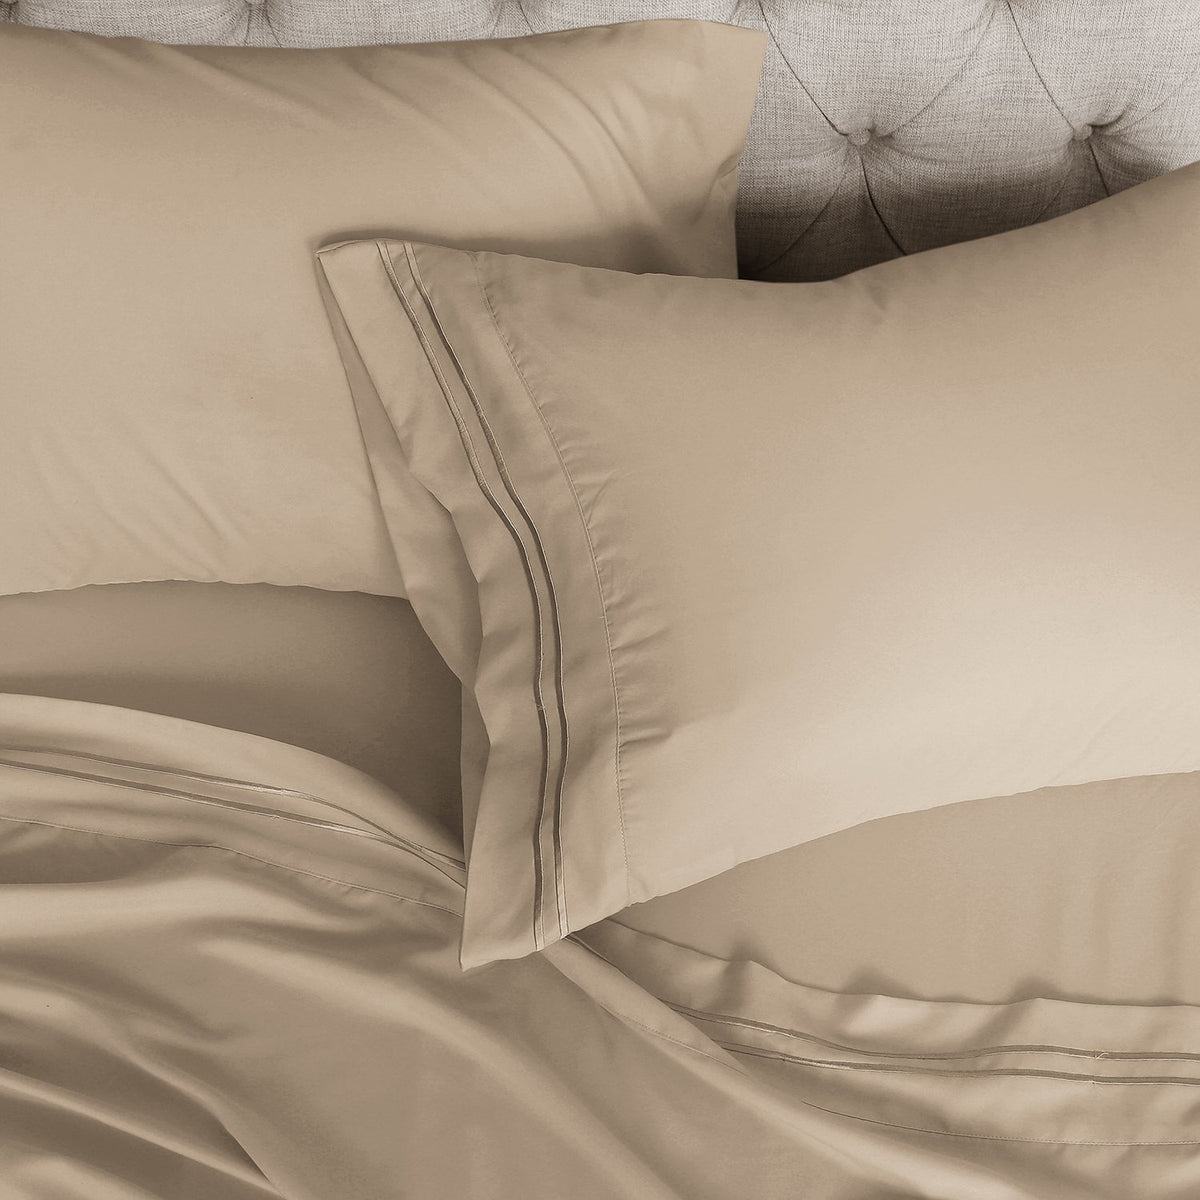 Sheet Sets | Shop Luxury Bedding and Bath at Luxor Linens